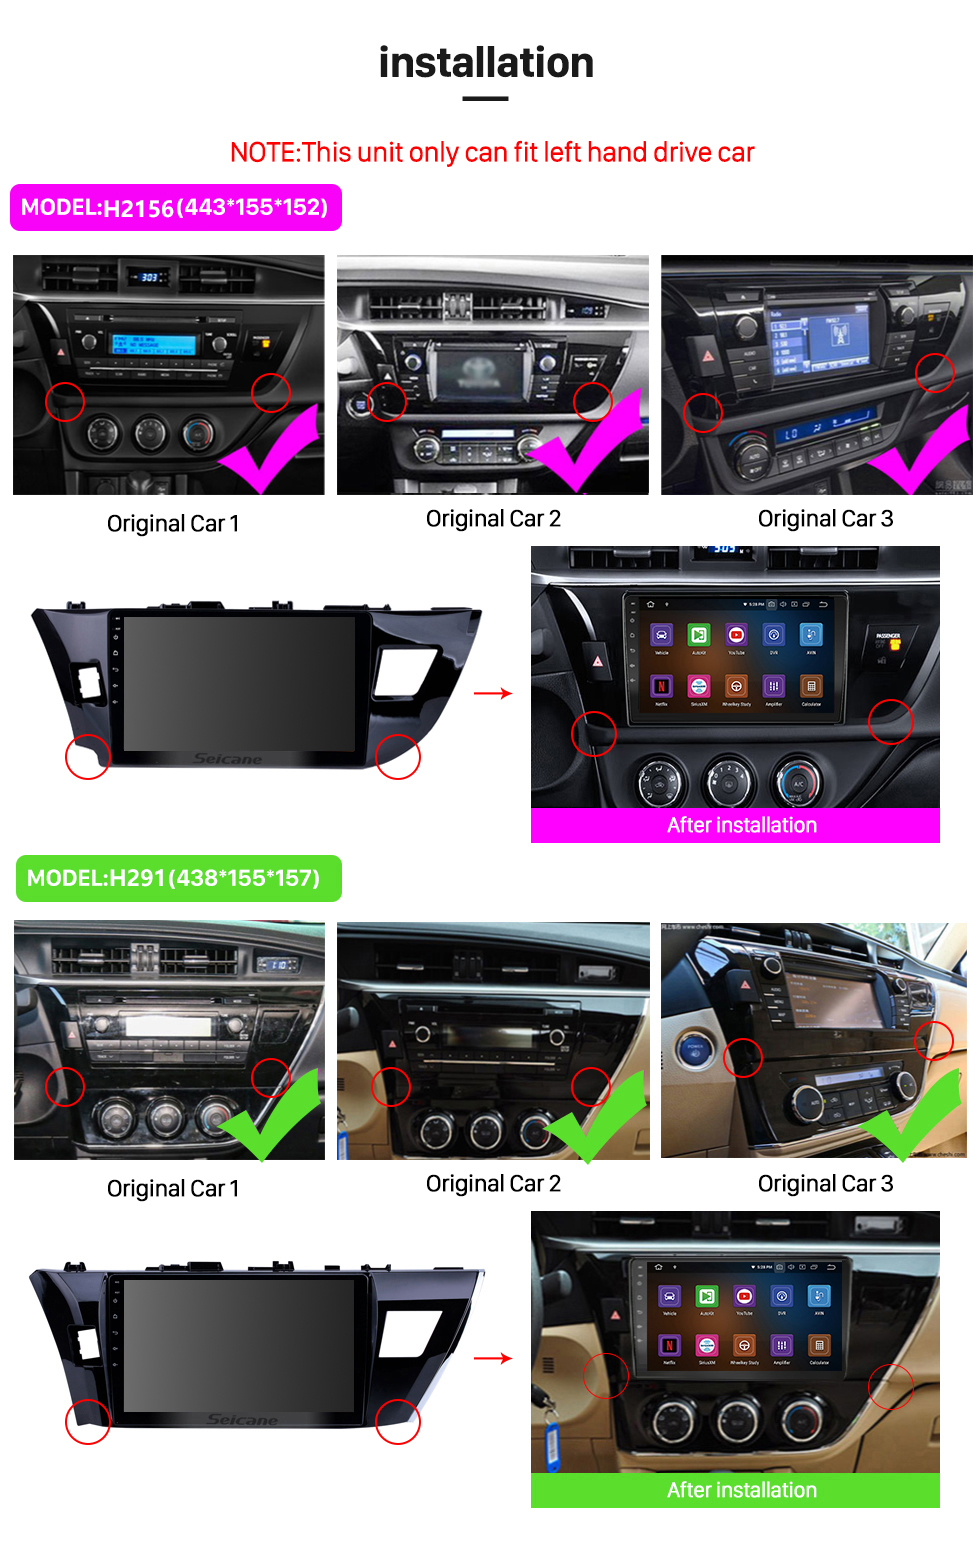 Seicane 10.1 inch 2013 2014 Toyota Corolla Radio Removal with Android 12.0 Autoradio Navigation Car Stereo for 1024*600 Multi-touch Capacitive Screen Bluetooth CD DVD Player 3G WiFi Mirror Link OBD2 Auto A/V MP3 MP4 HD 1080P